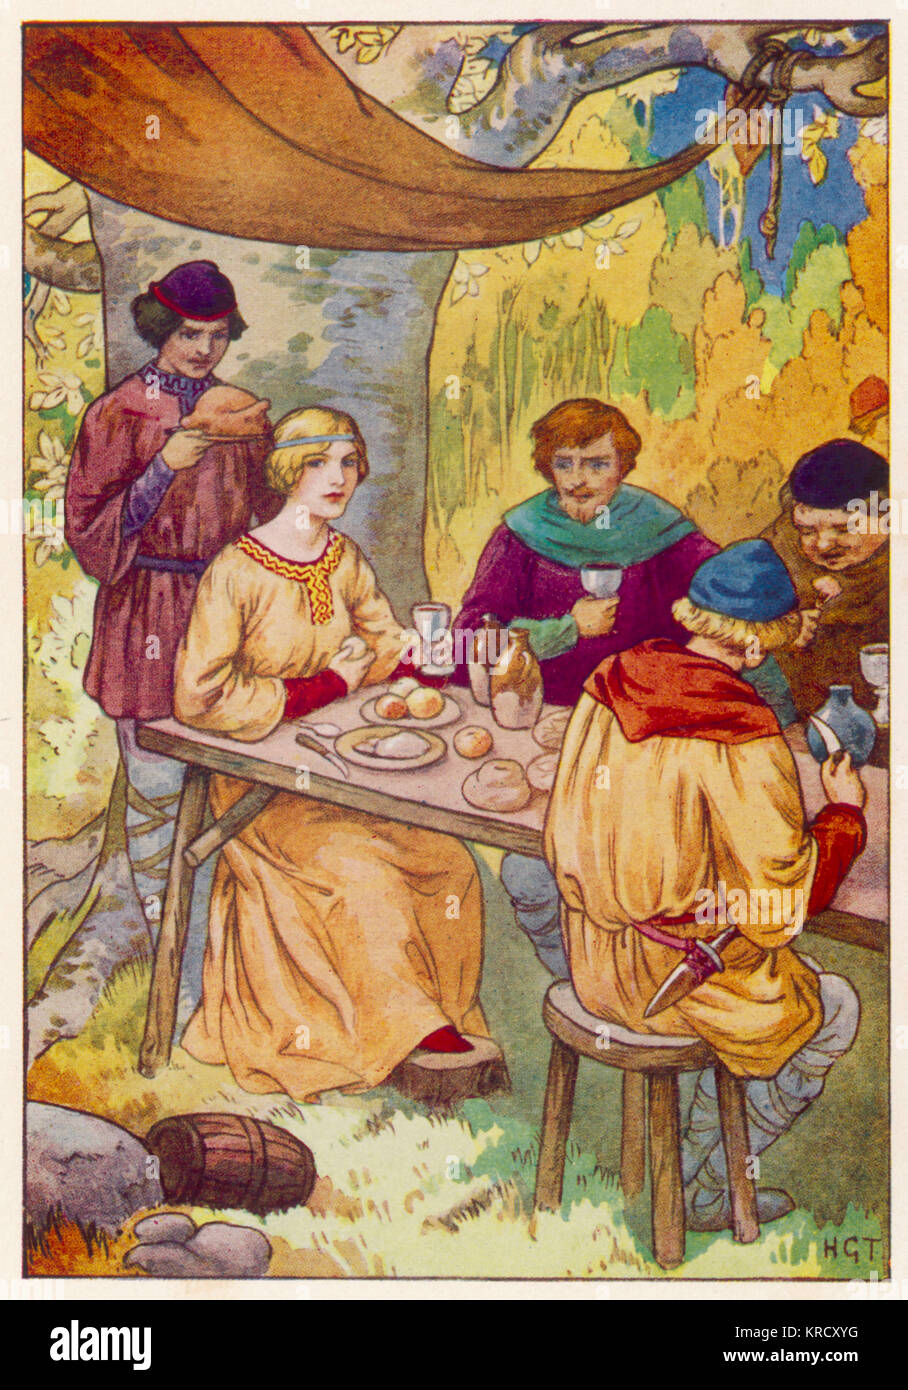 Robin Hood and his merry men  feast, with Maid Marian to  grace their table.        Date: circa 1930 Stock Photo